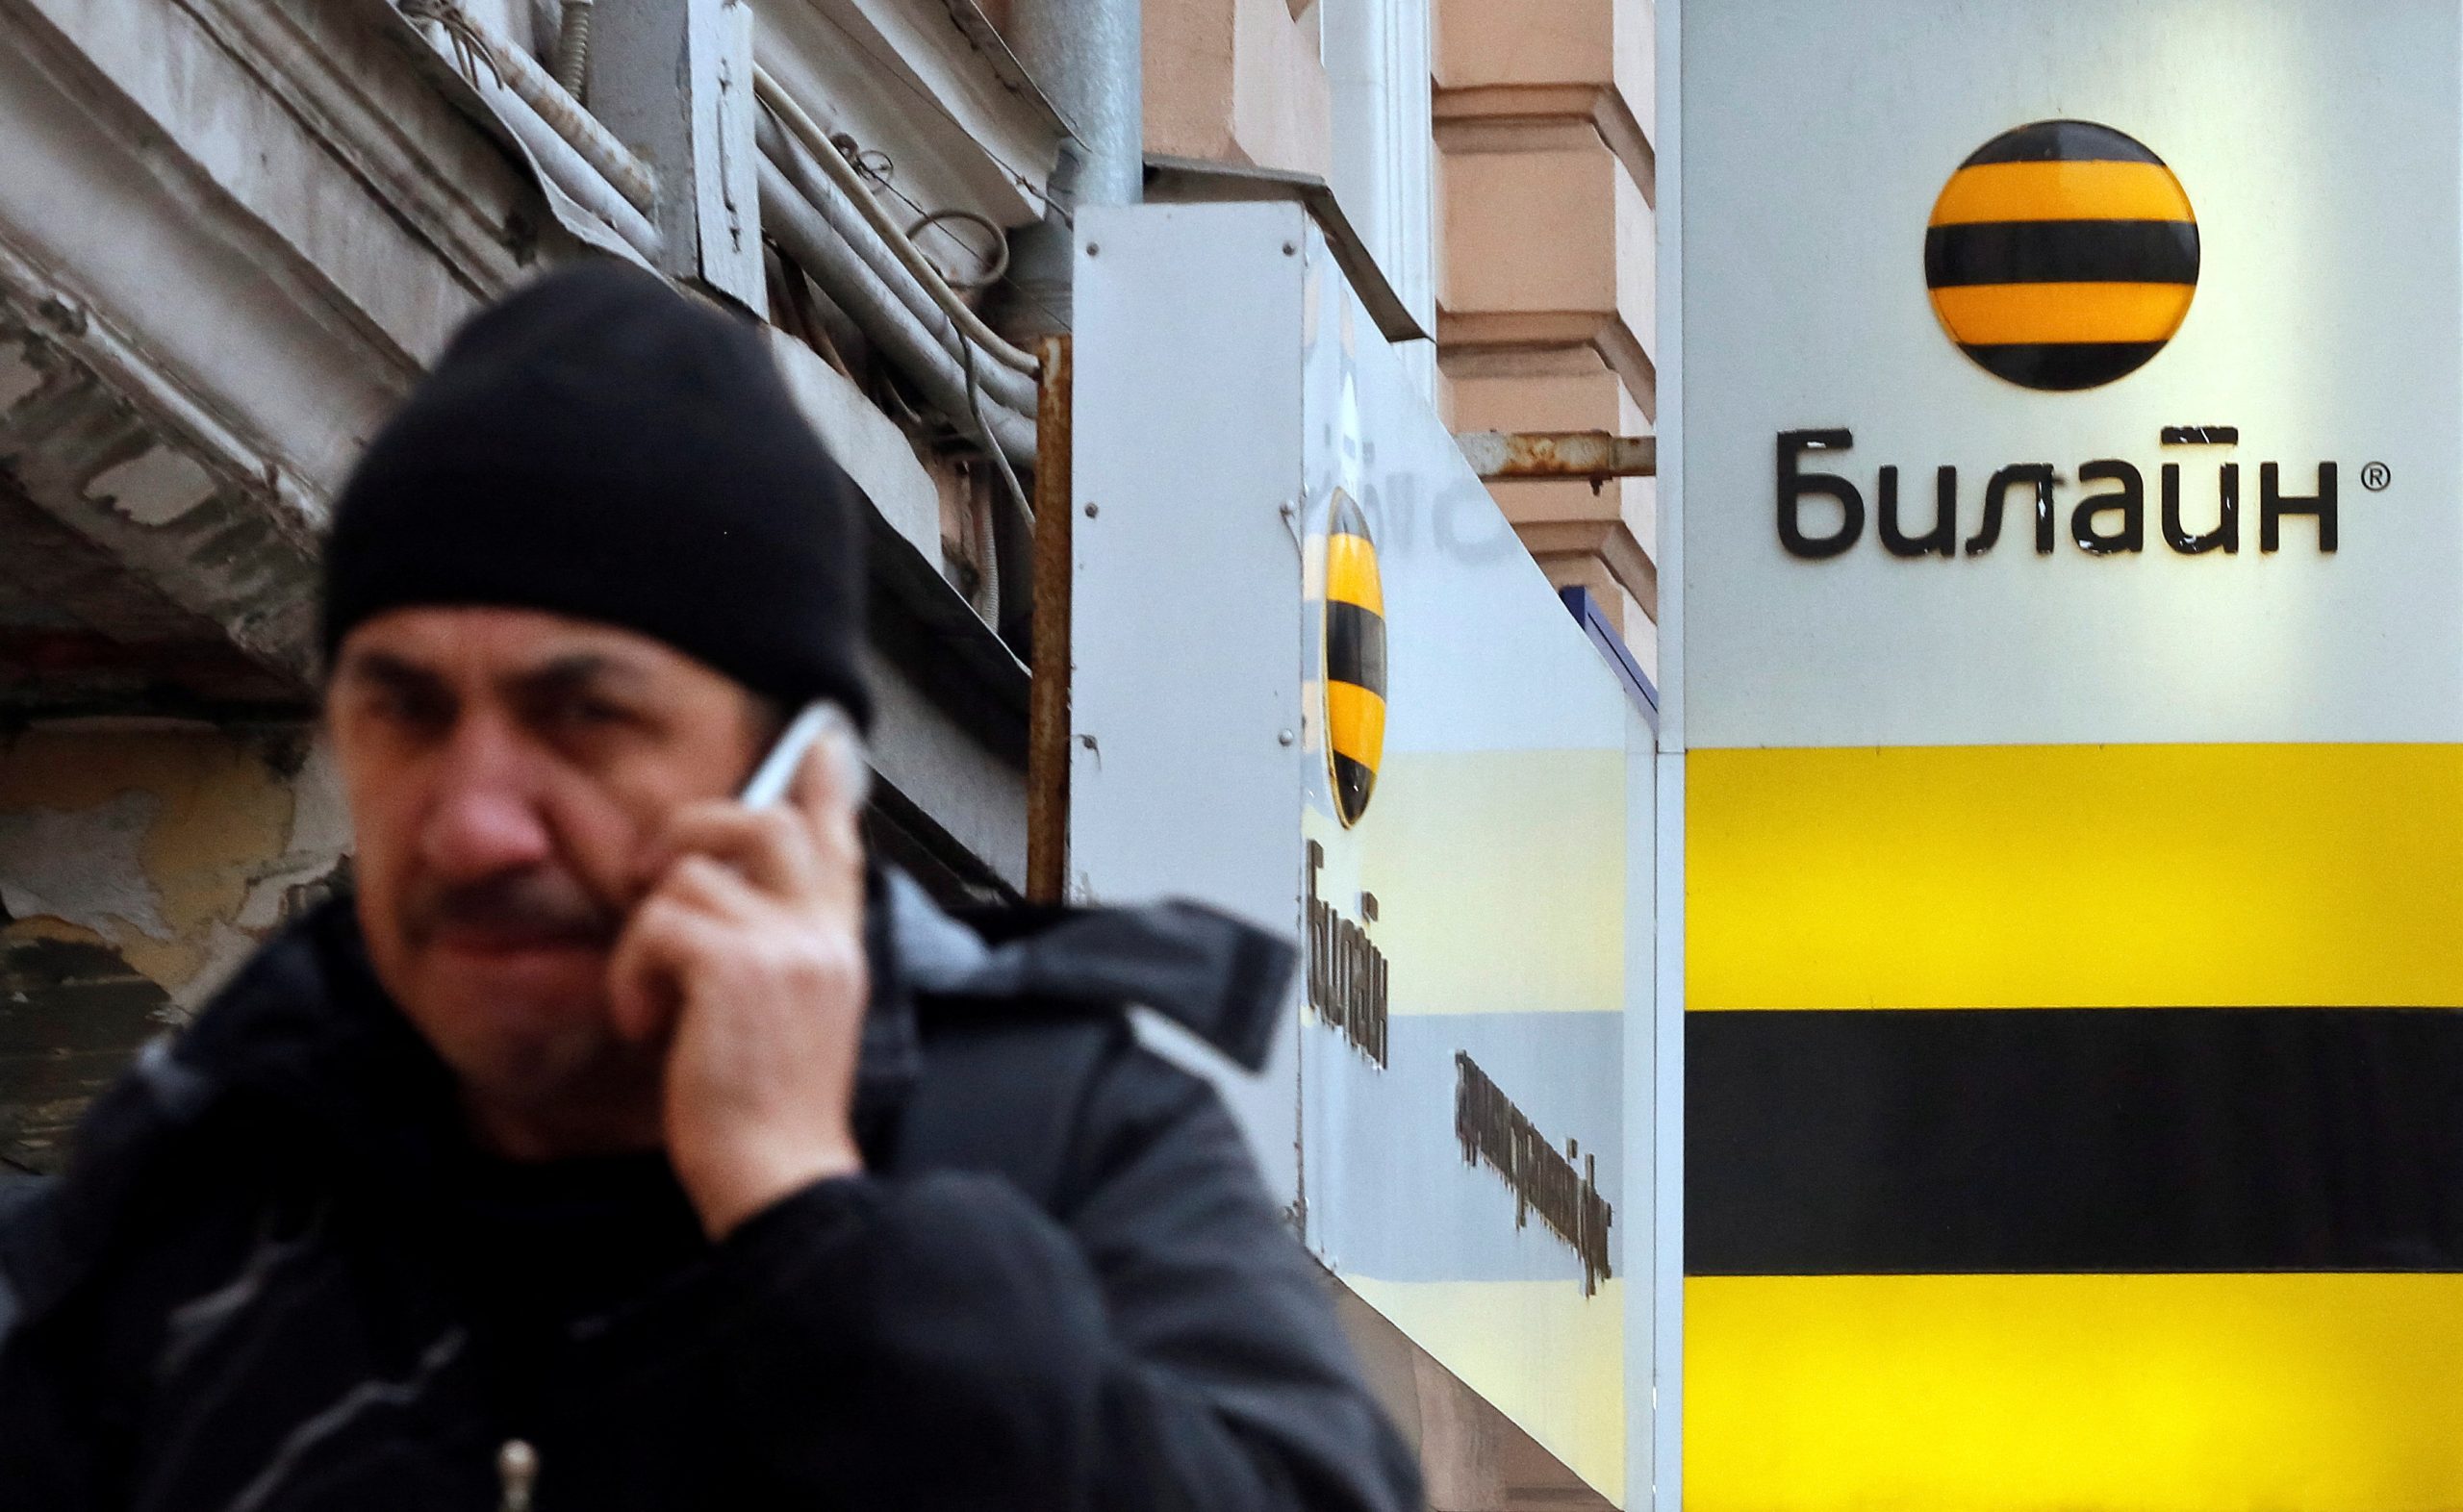 Photo: A man speaks on the phone near an office of Beeline, the brand owned by mobile phone operator Vimpelcom, in Moscow, November 12, 2014. Credit: REUTERS/Maxim Shemetov/File Photo